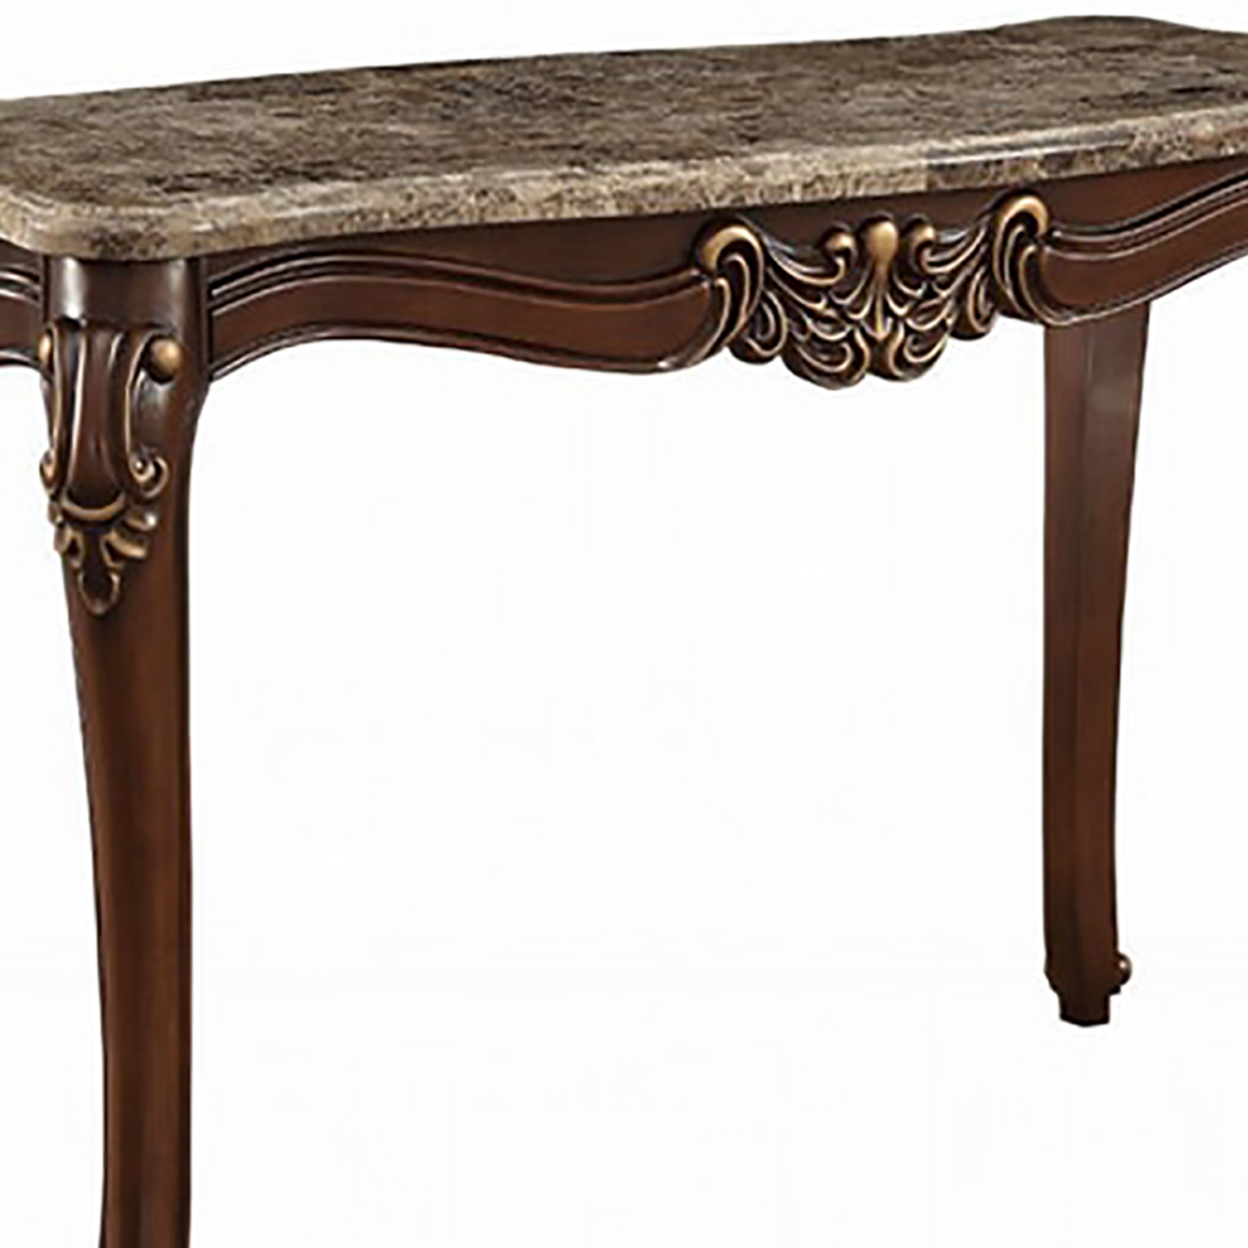 Marble Top Sofa Table With Carved Floral Motifs Wooden Feet, Brown- Saltoro Sherpi